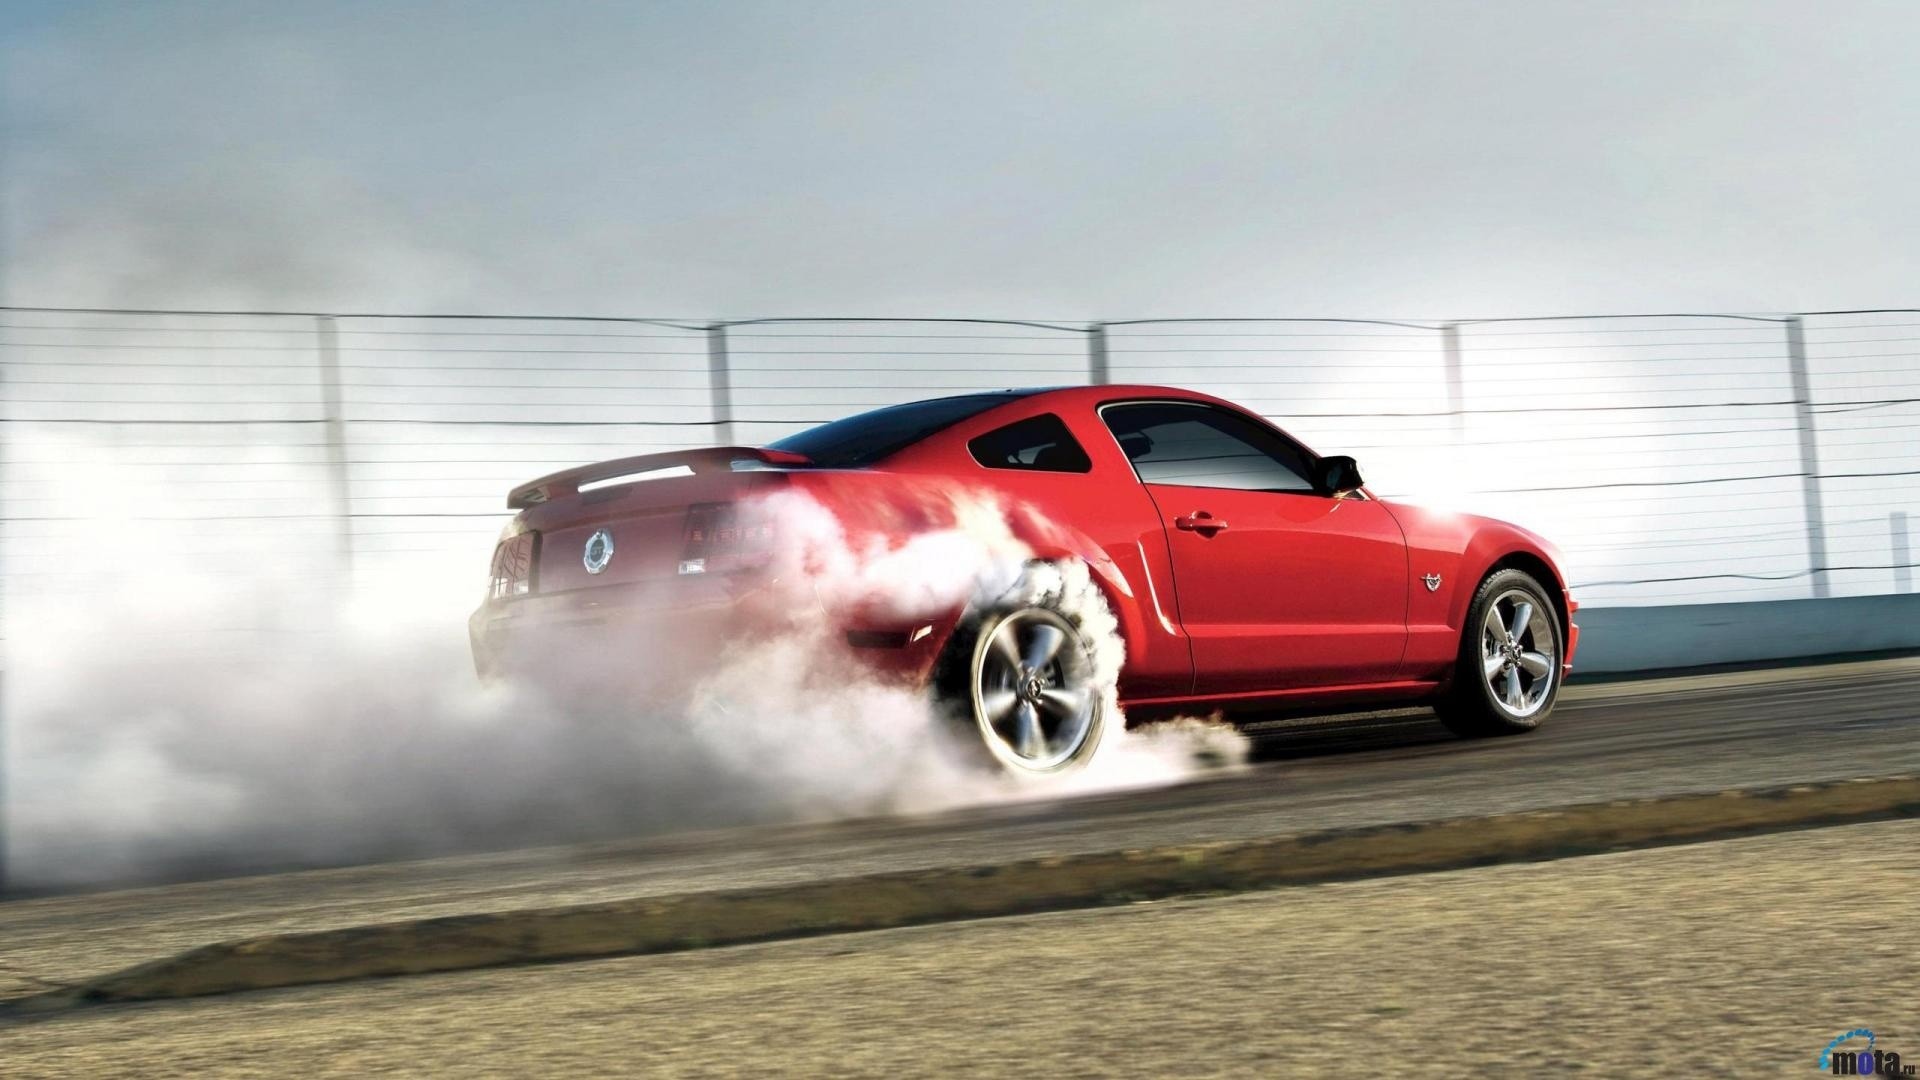 Shelby GT Car Shelby Red Cars Smoke Vehicle 1920x1080